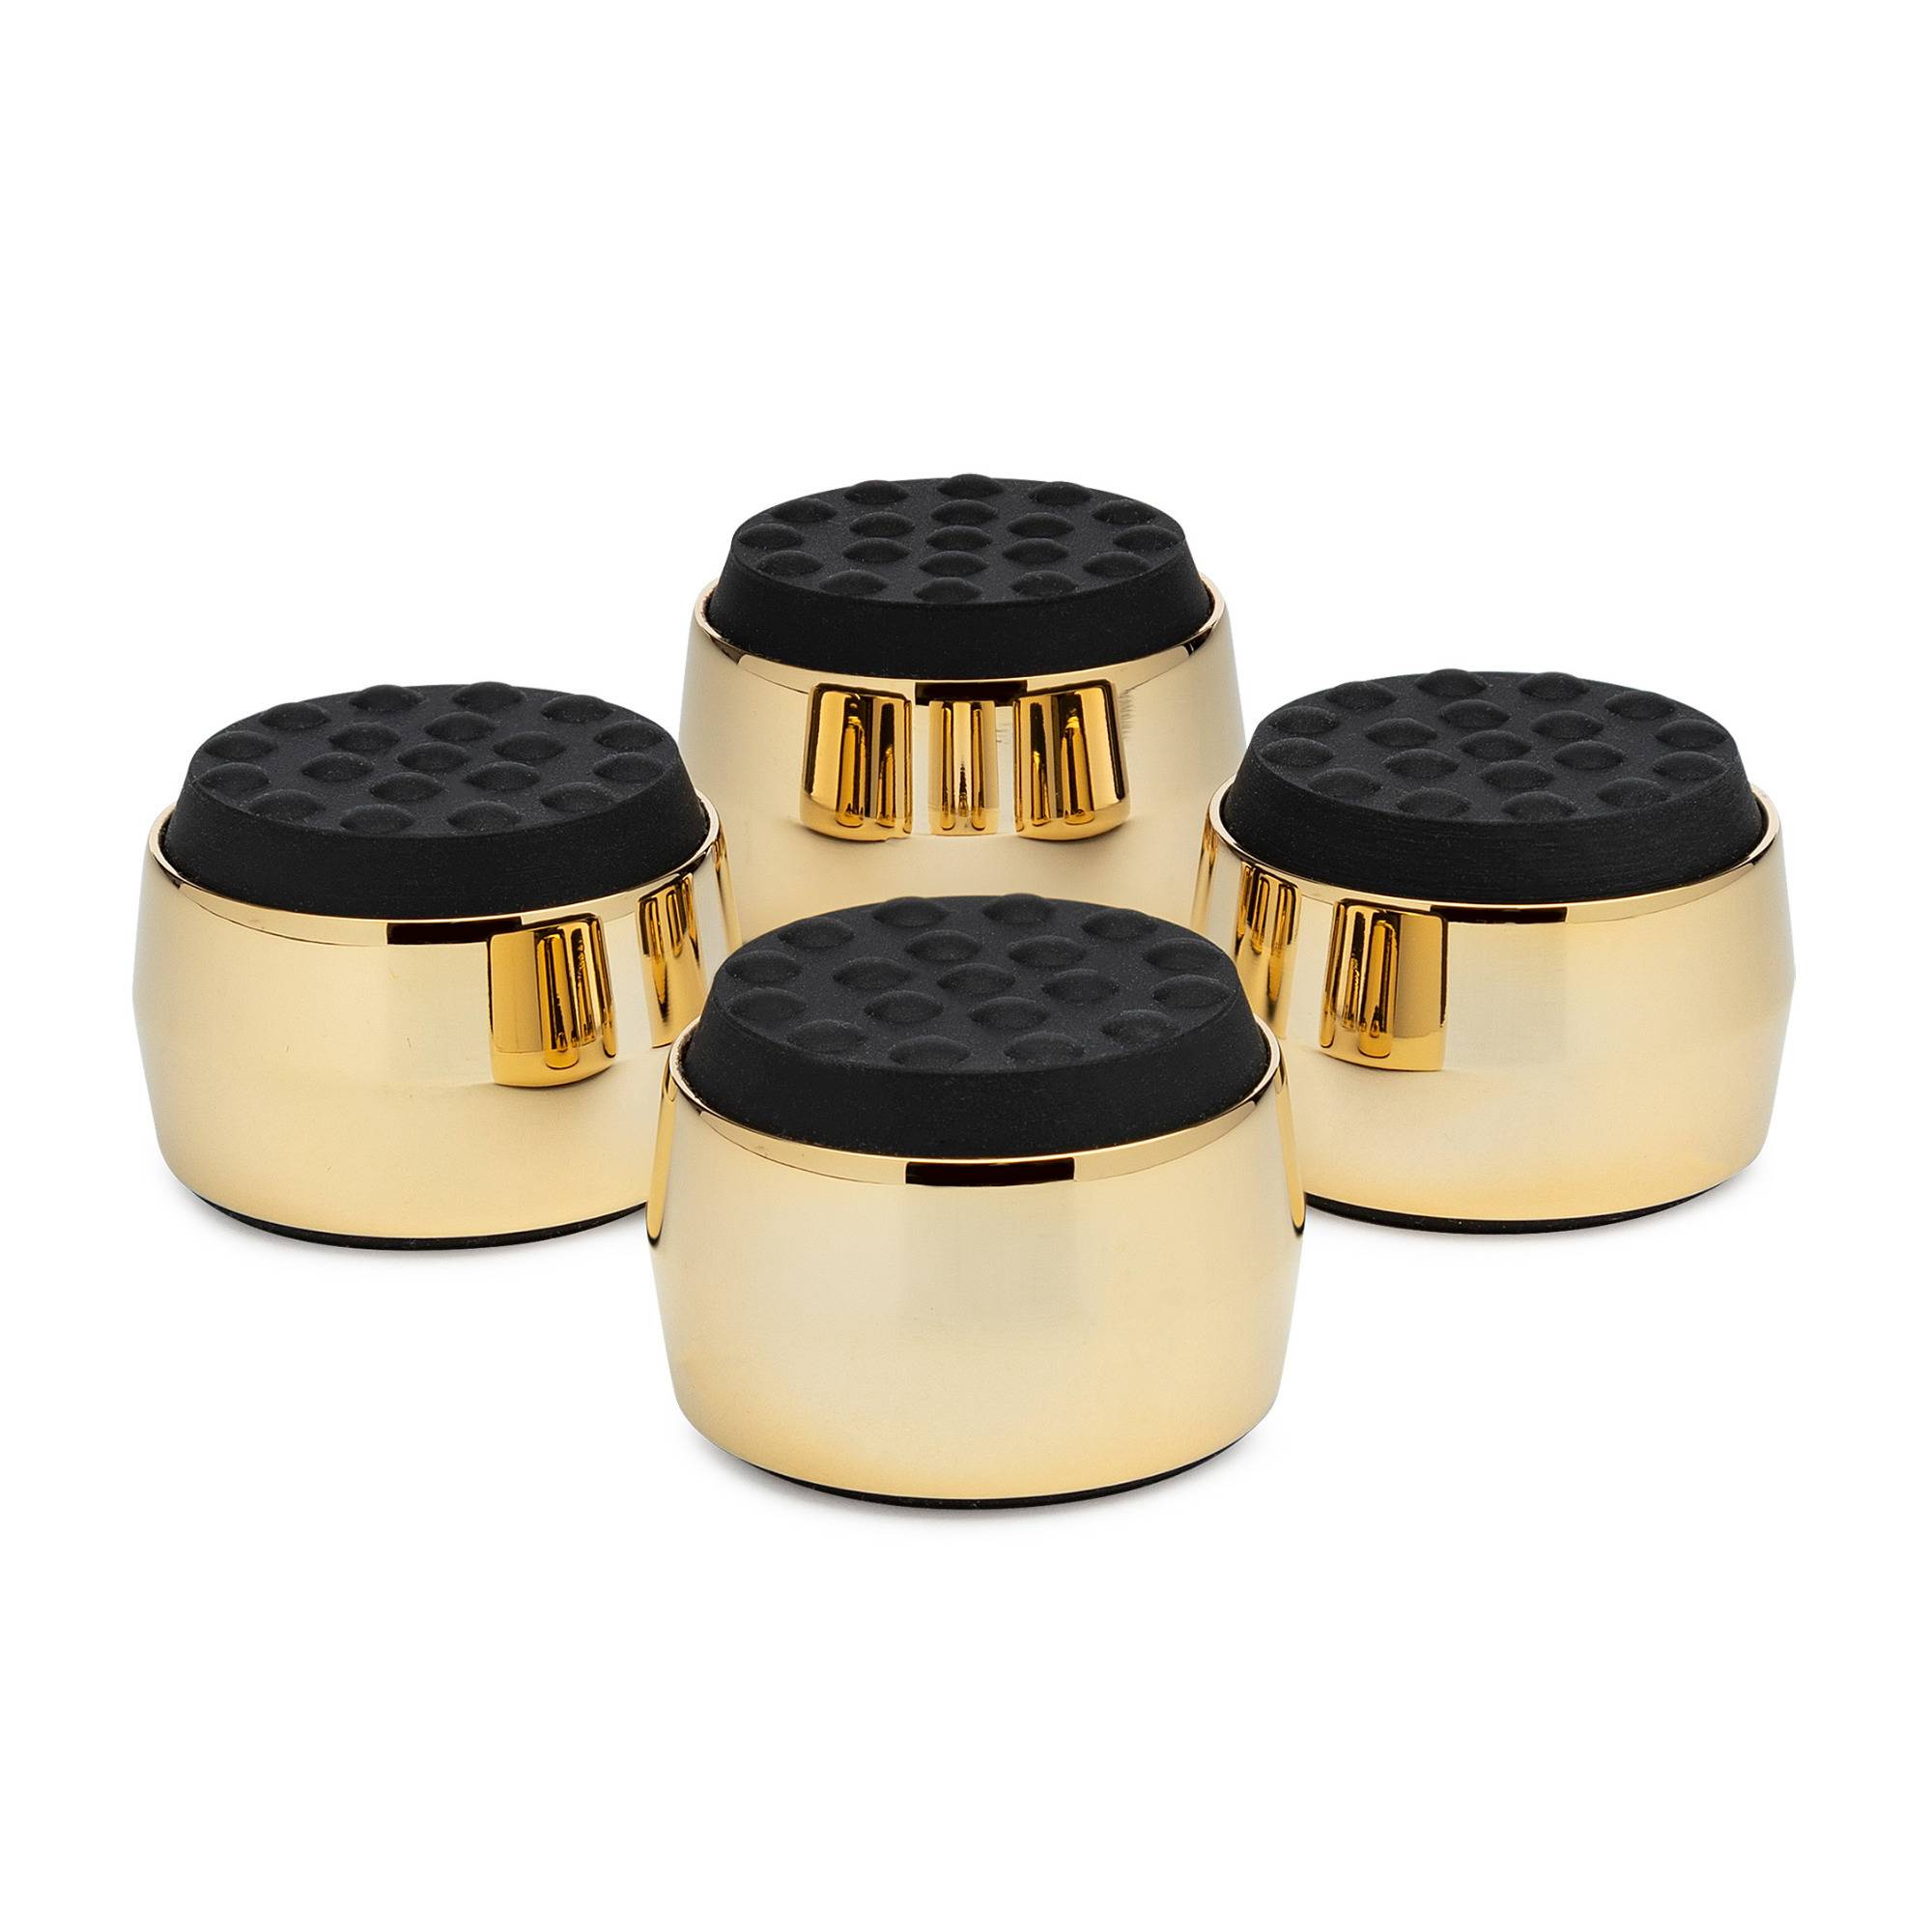 Knox Gear Subwoofer Isolation Feet (4-pack, Black/Gold)